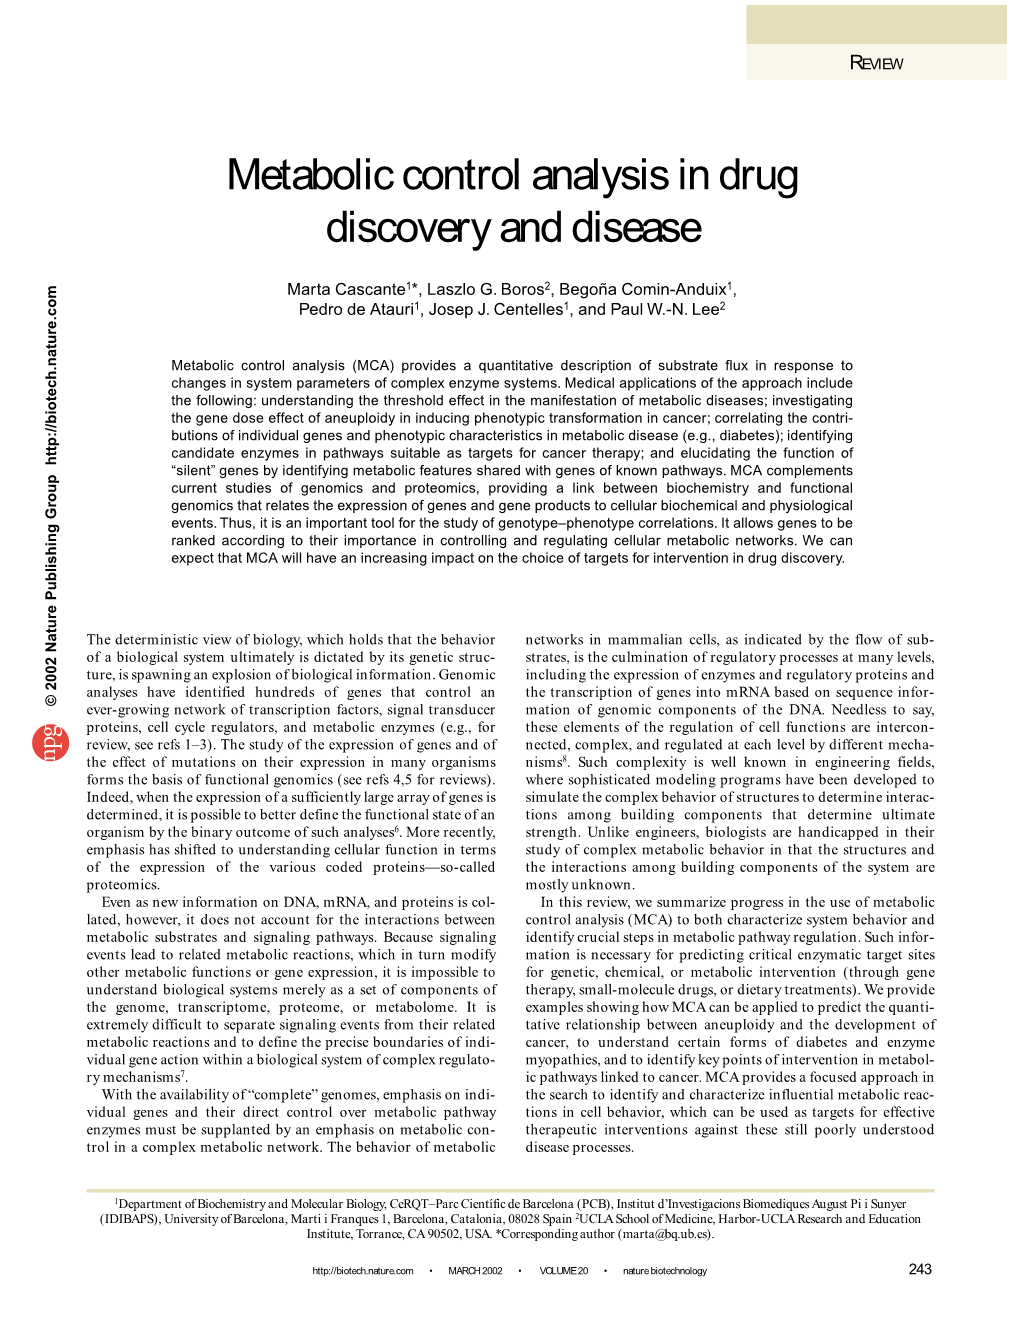 Metabolic Control Analysis in Drug Discovery and Disease